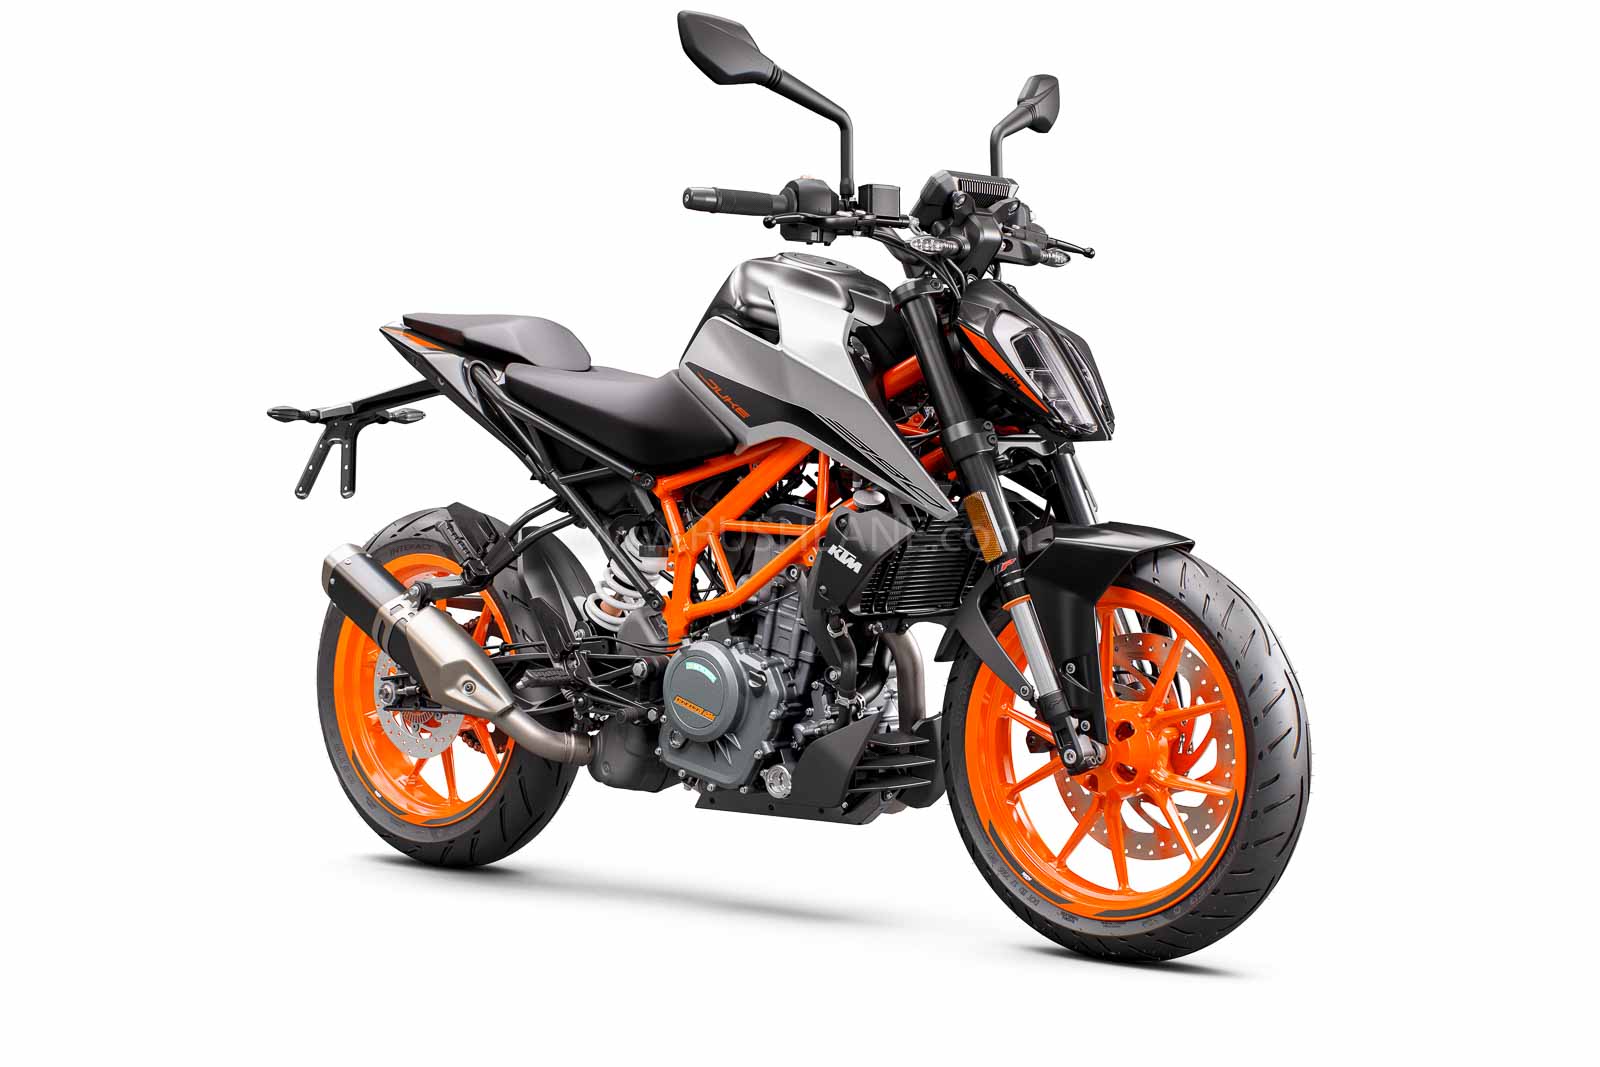 2020 KTM range launched with BS6 engines | 200 Duke gets 